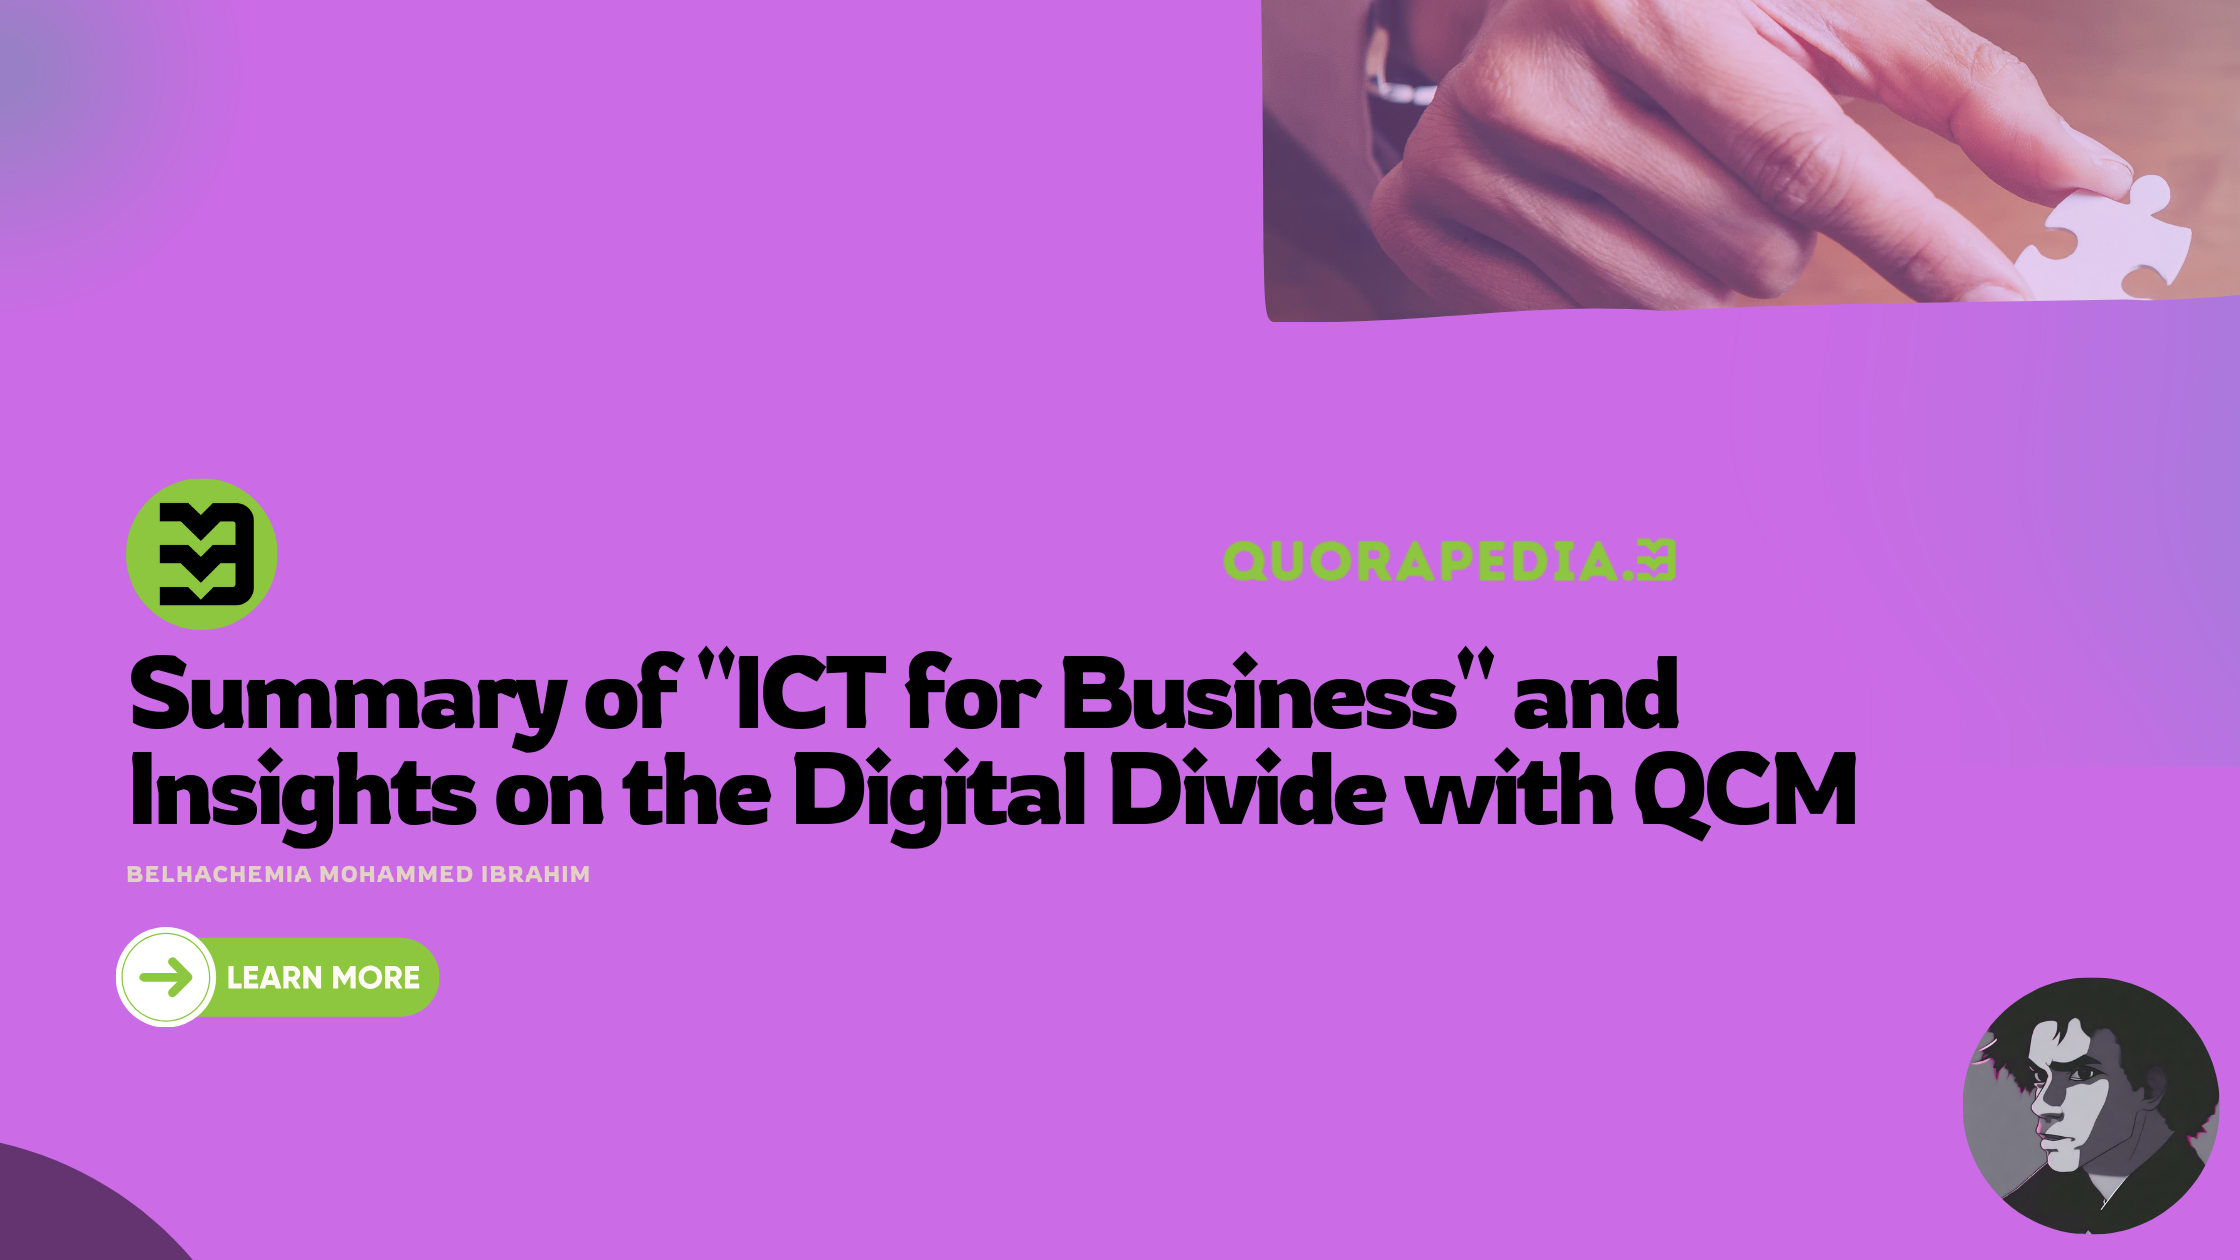 Summary of "ICT for Business" and Insights on the Digital Divide with QCM